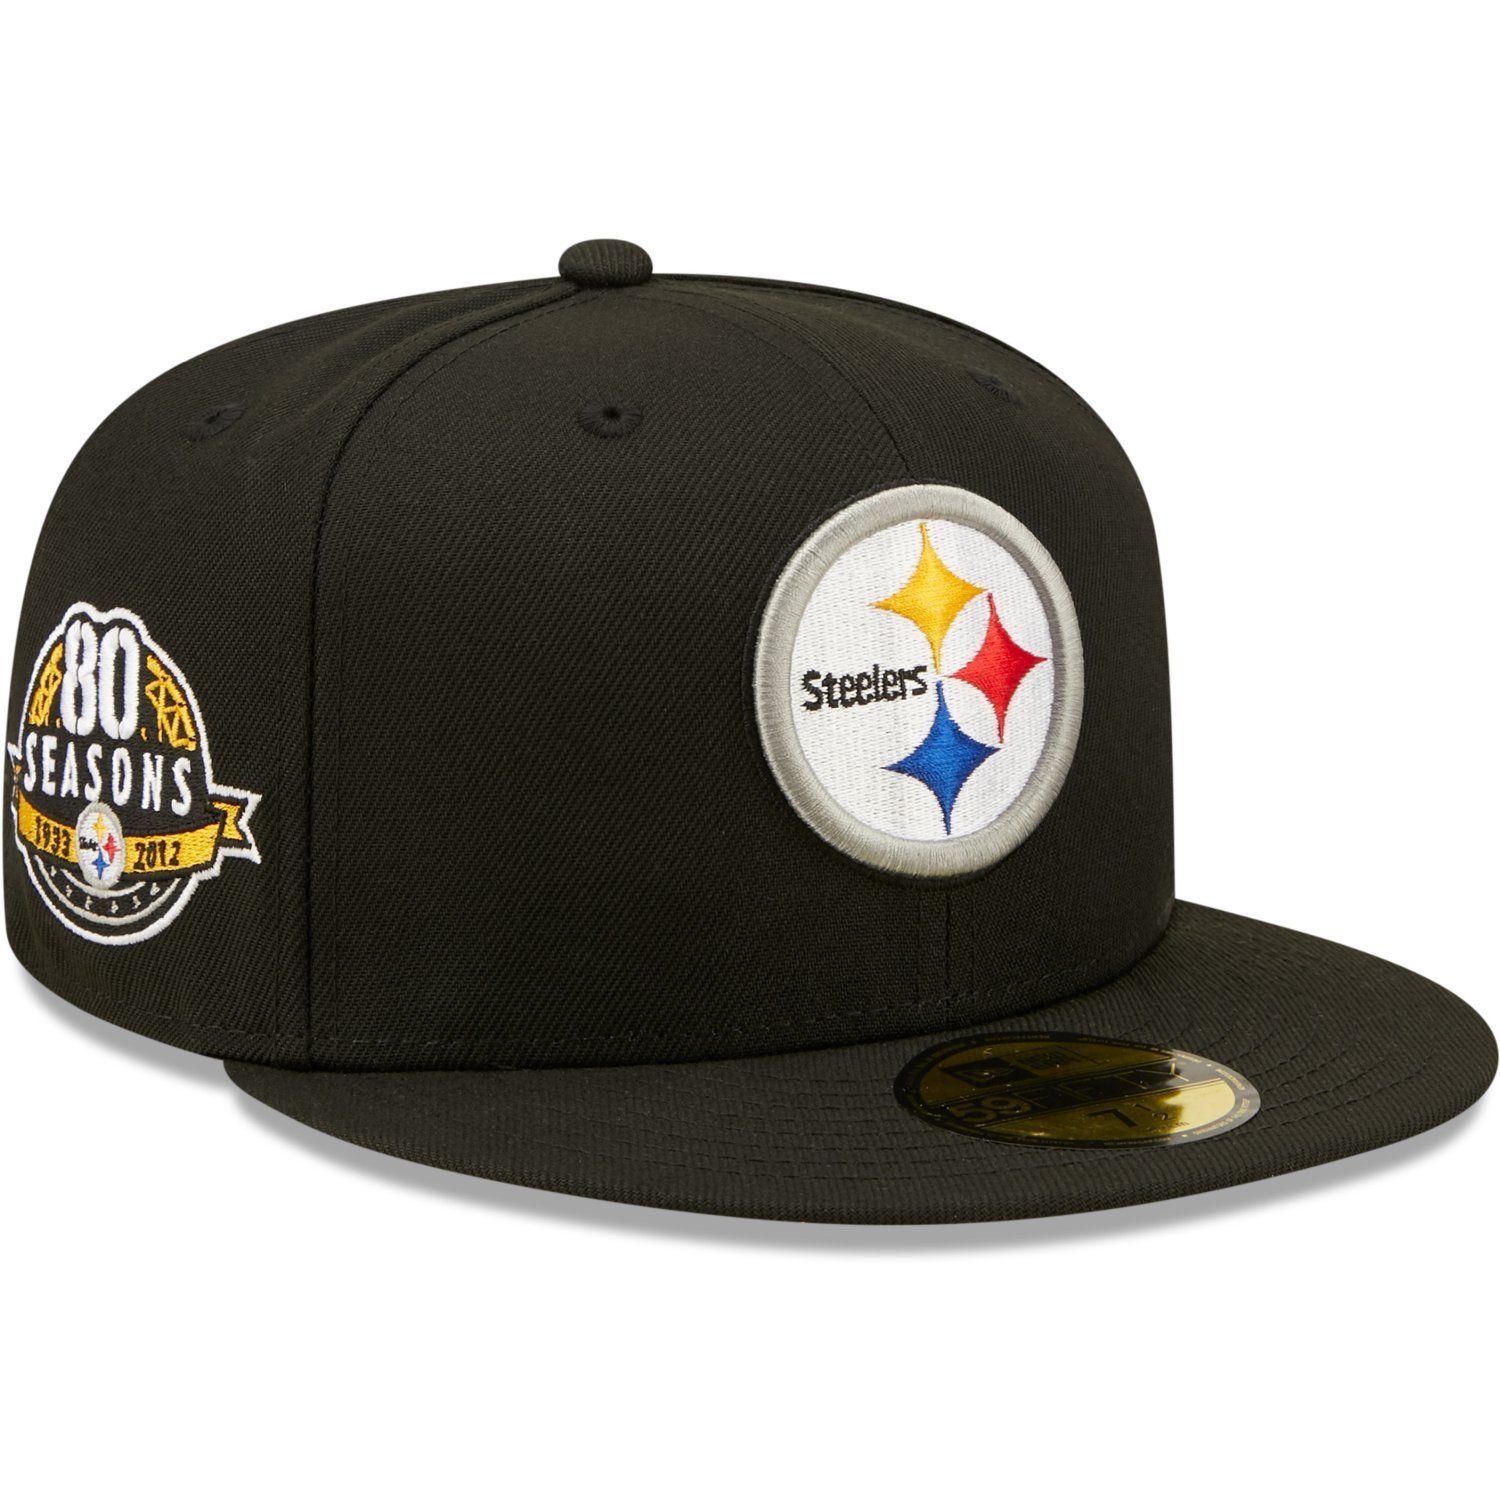 Era Fitted Steelers Seasons New Pittsburgh 80 Cap 59Fifty